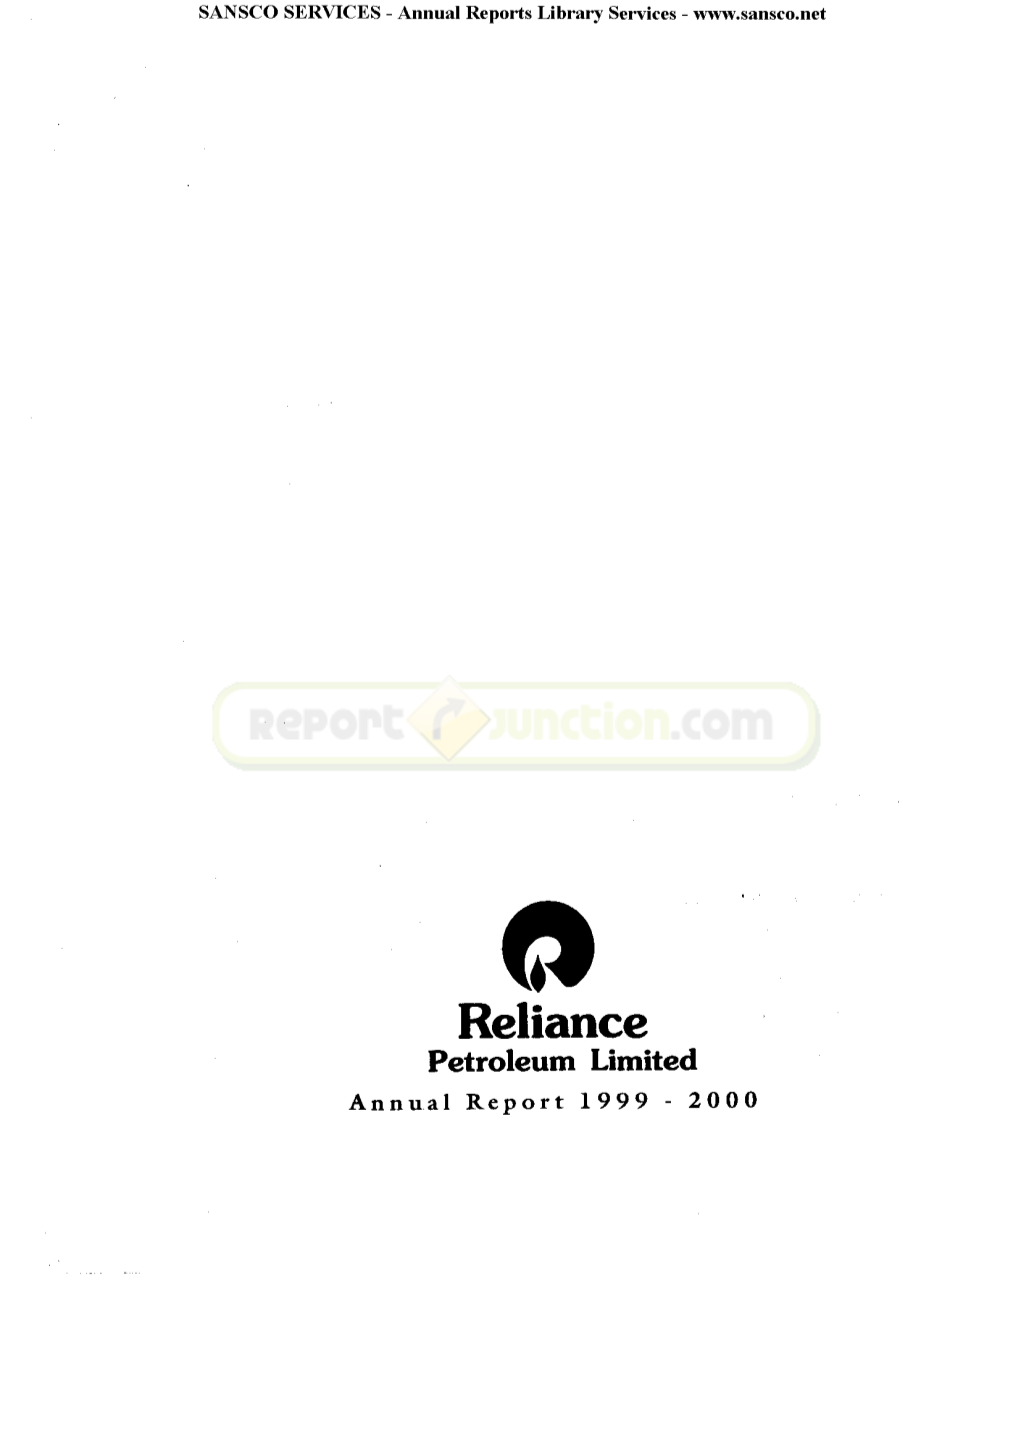 Reliance Petroleum Limited Annual Report 1999 - 2000